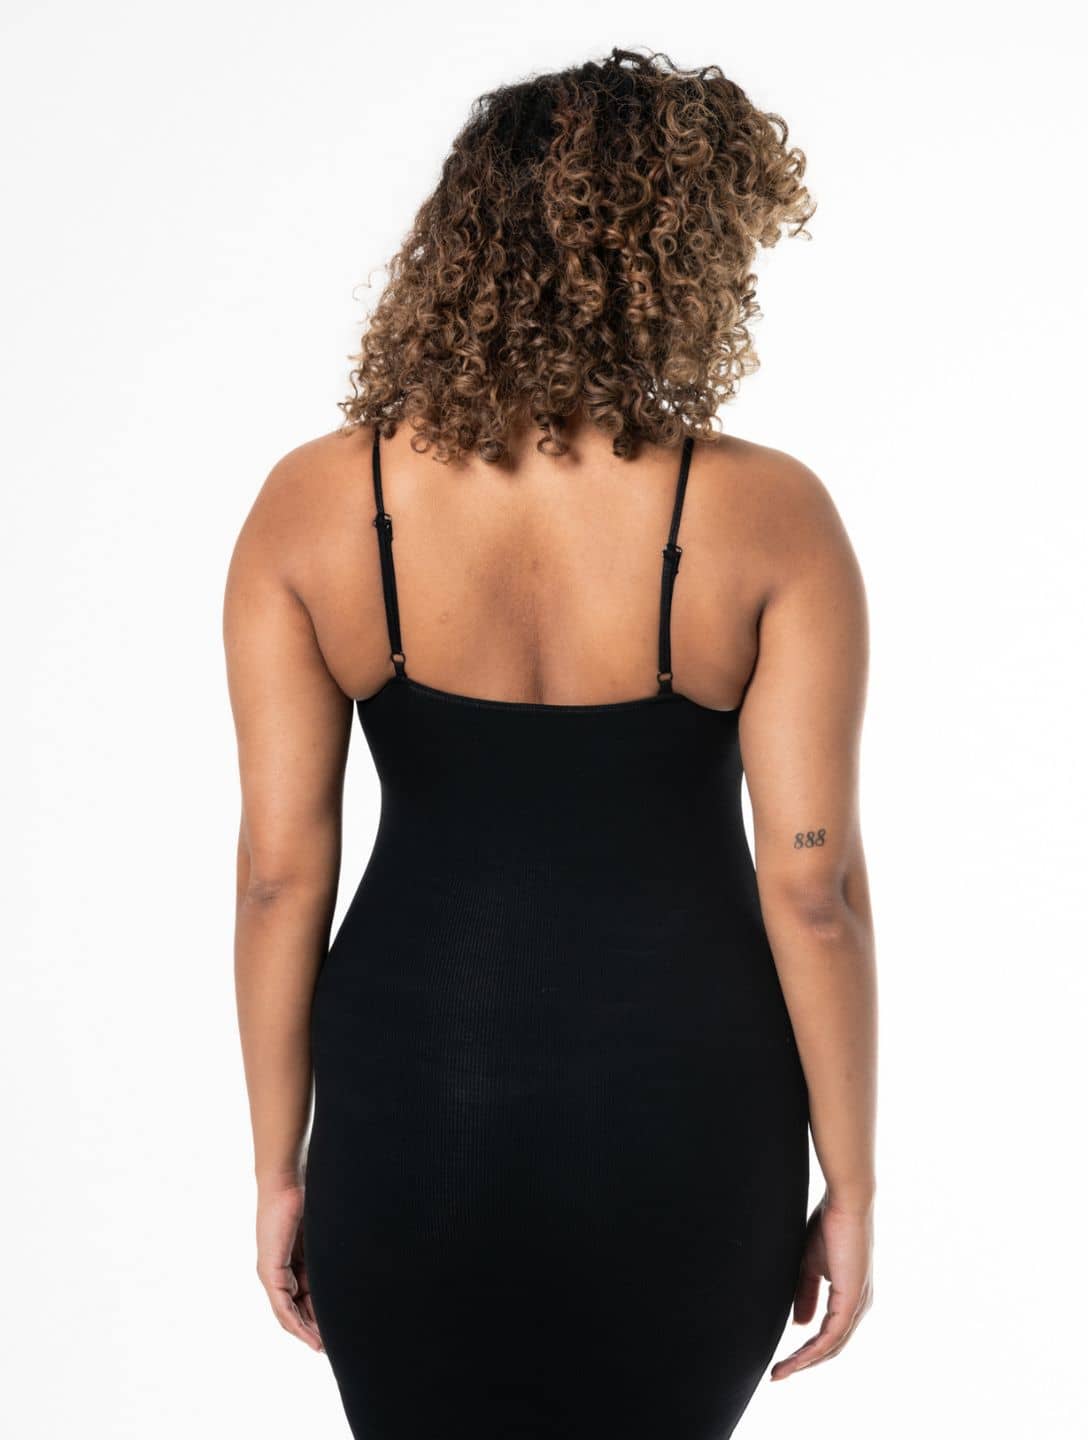 a maxi dress that comes with shapewear , umm yes🤎 as a girl that only